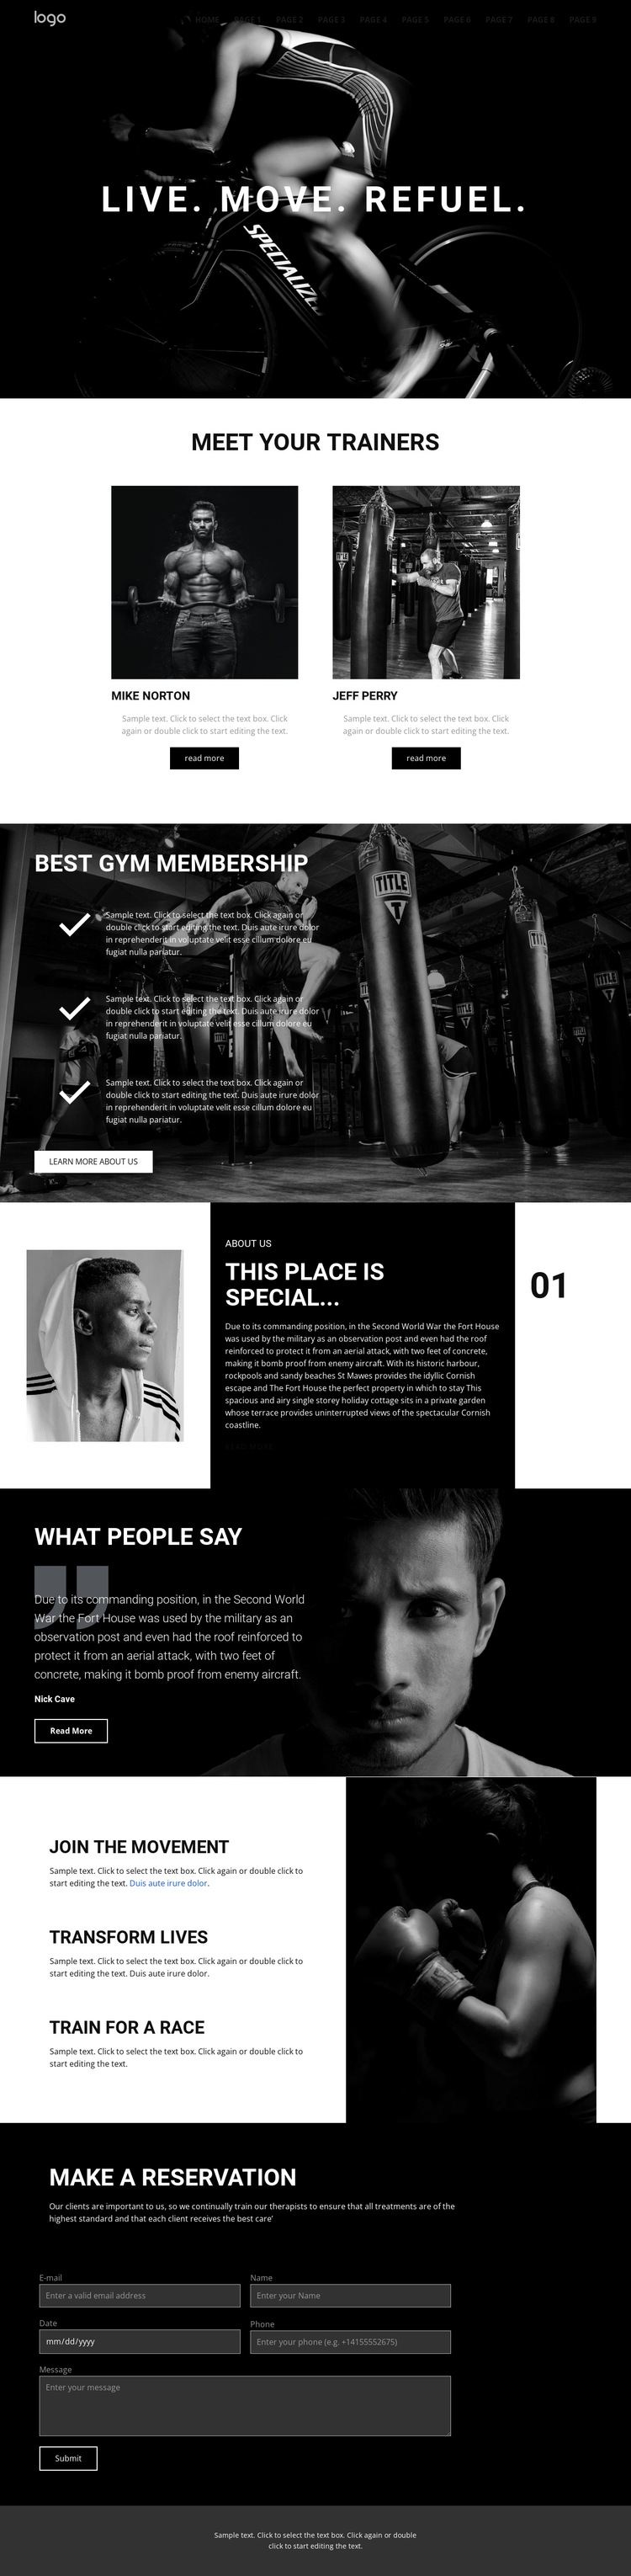 Refuel at power gym HTML5 Template